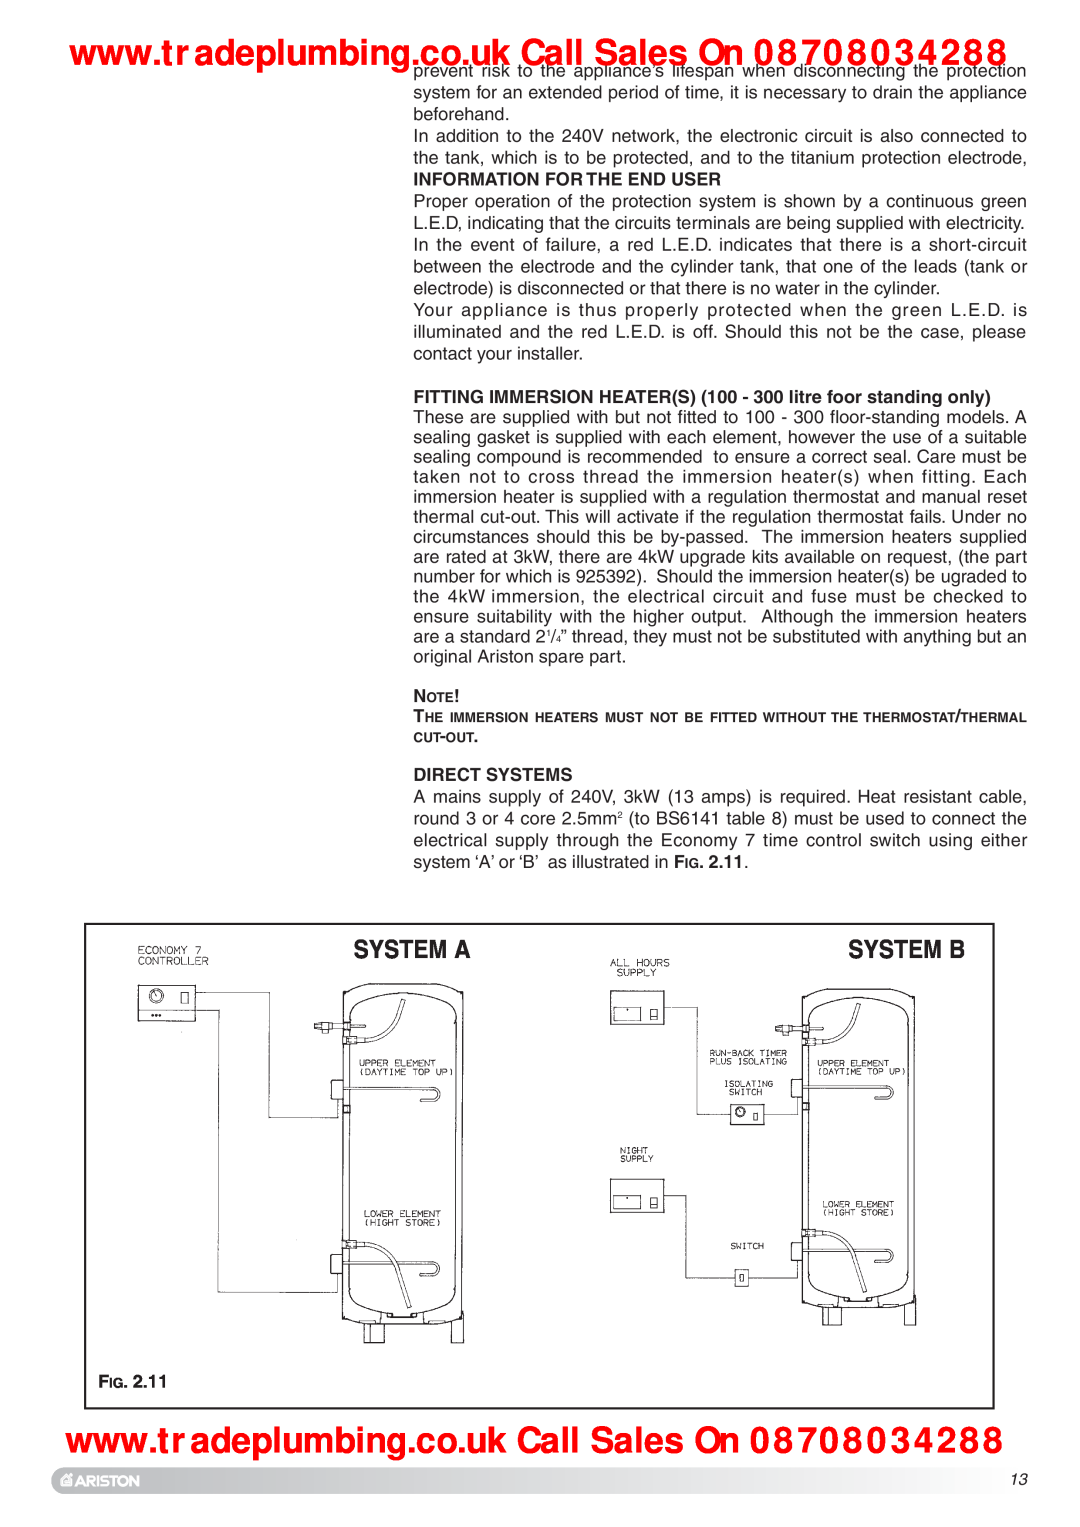 Ariston Unvented Hot Water Storage Cylinders manual System A, System B 